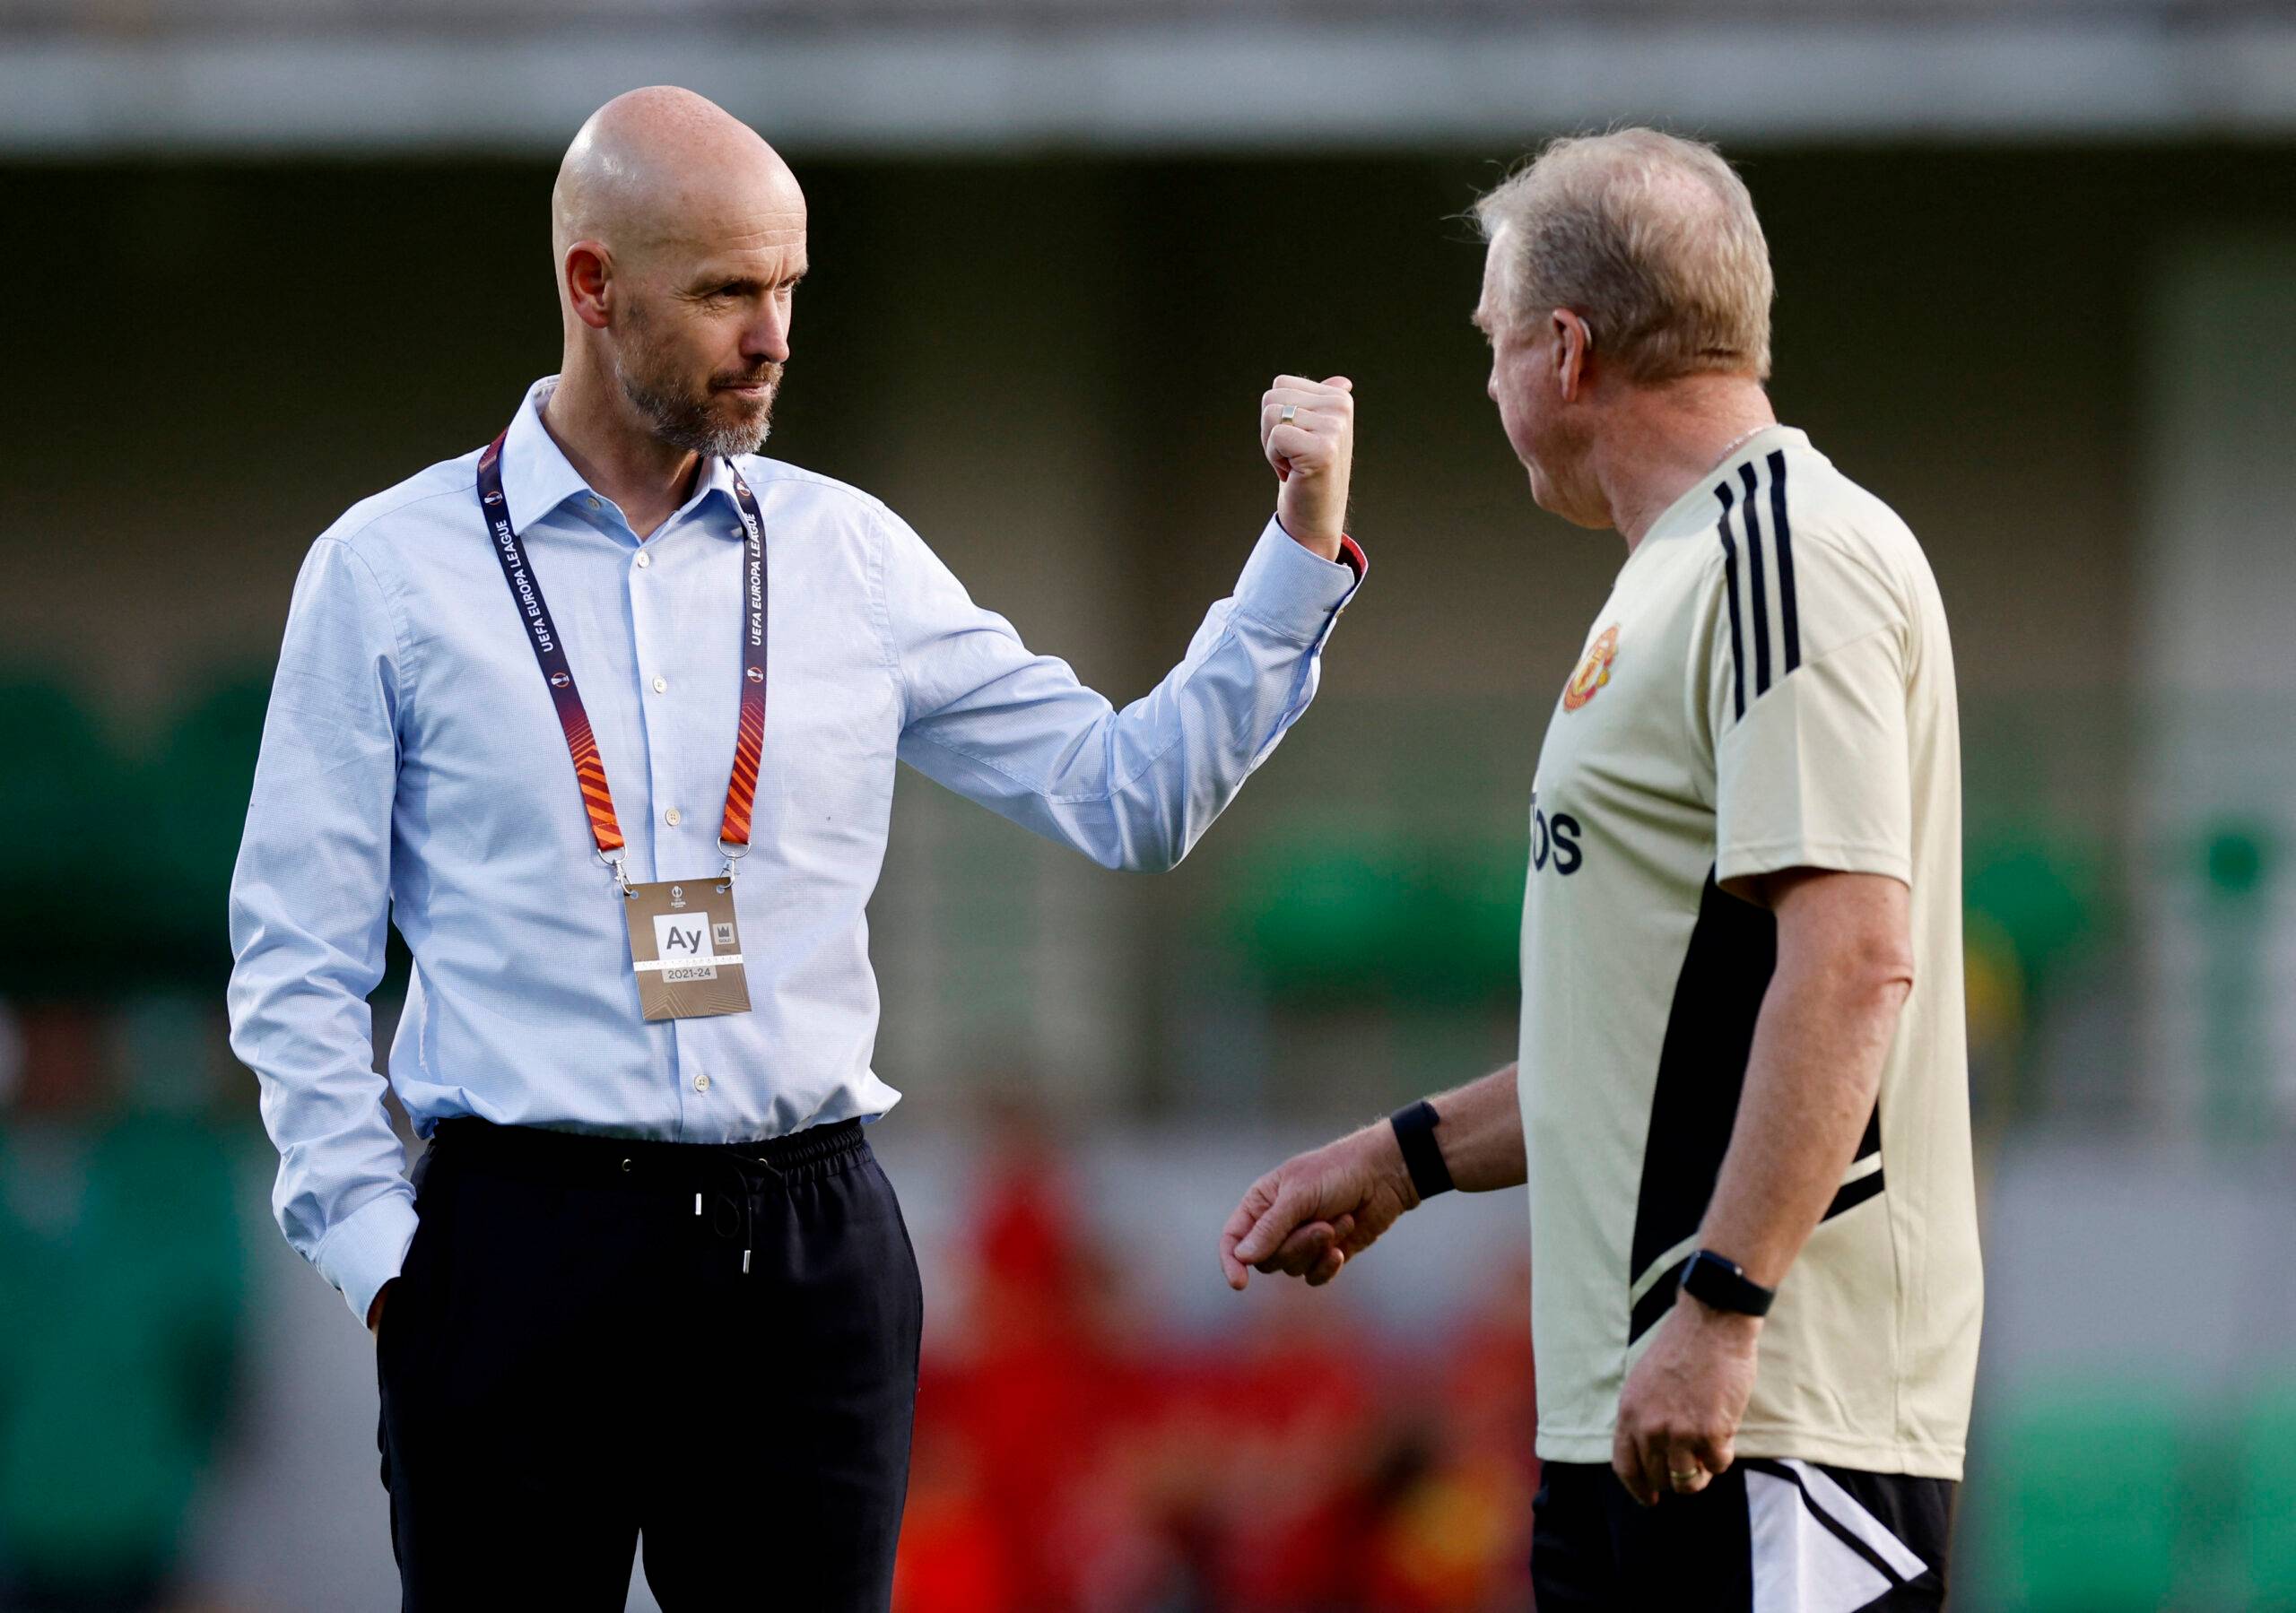 Manchester United manager Erik ten Hag with assistant coach Steve McClaren before match